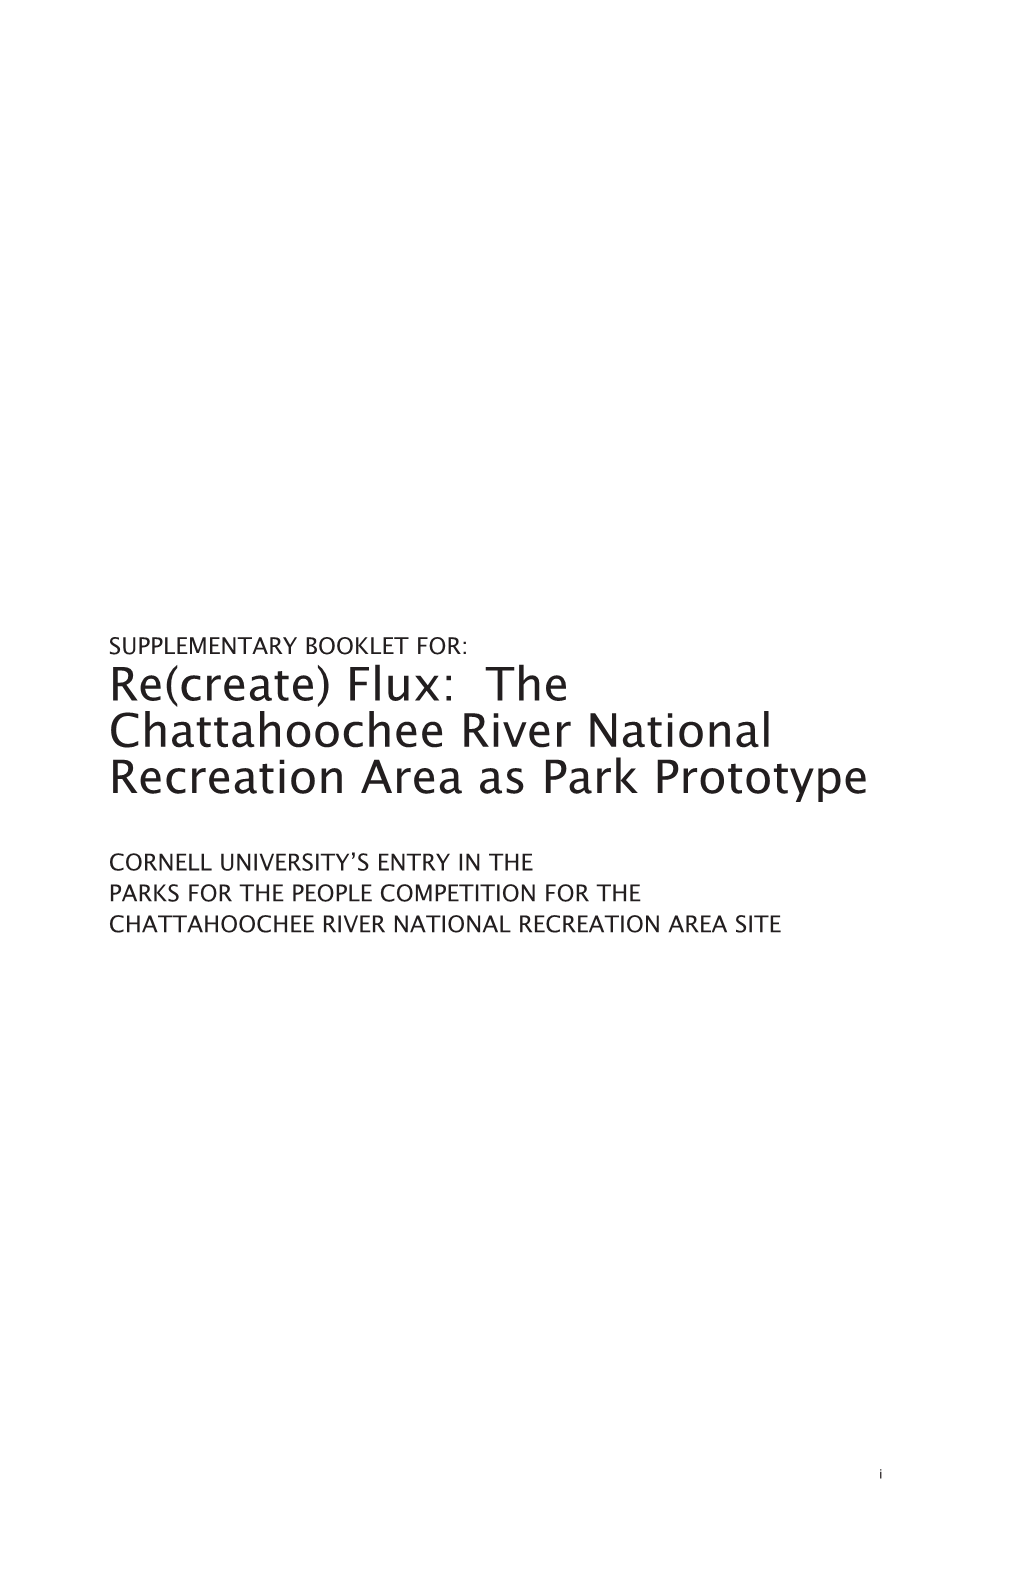 The Chattahoochee River National Recreation Area As Park Prototype